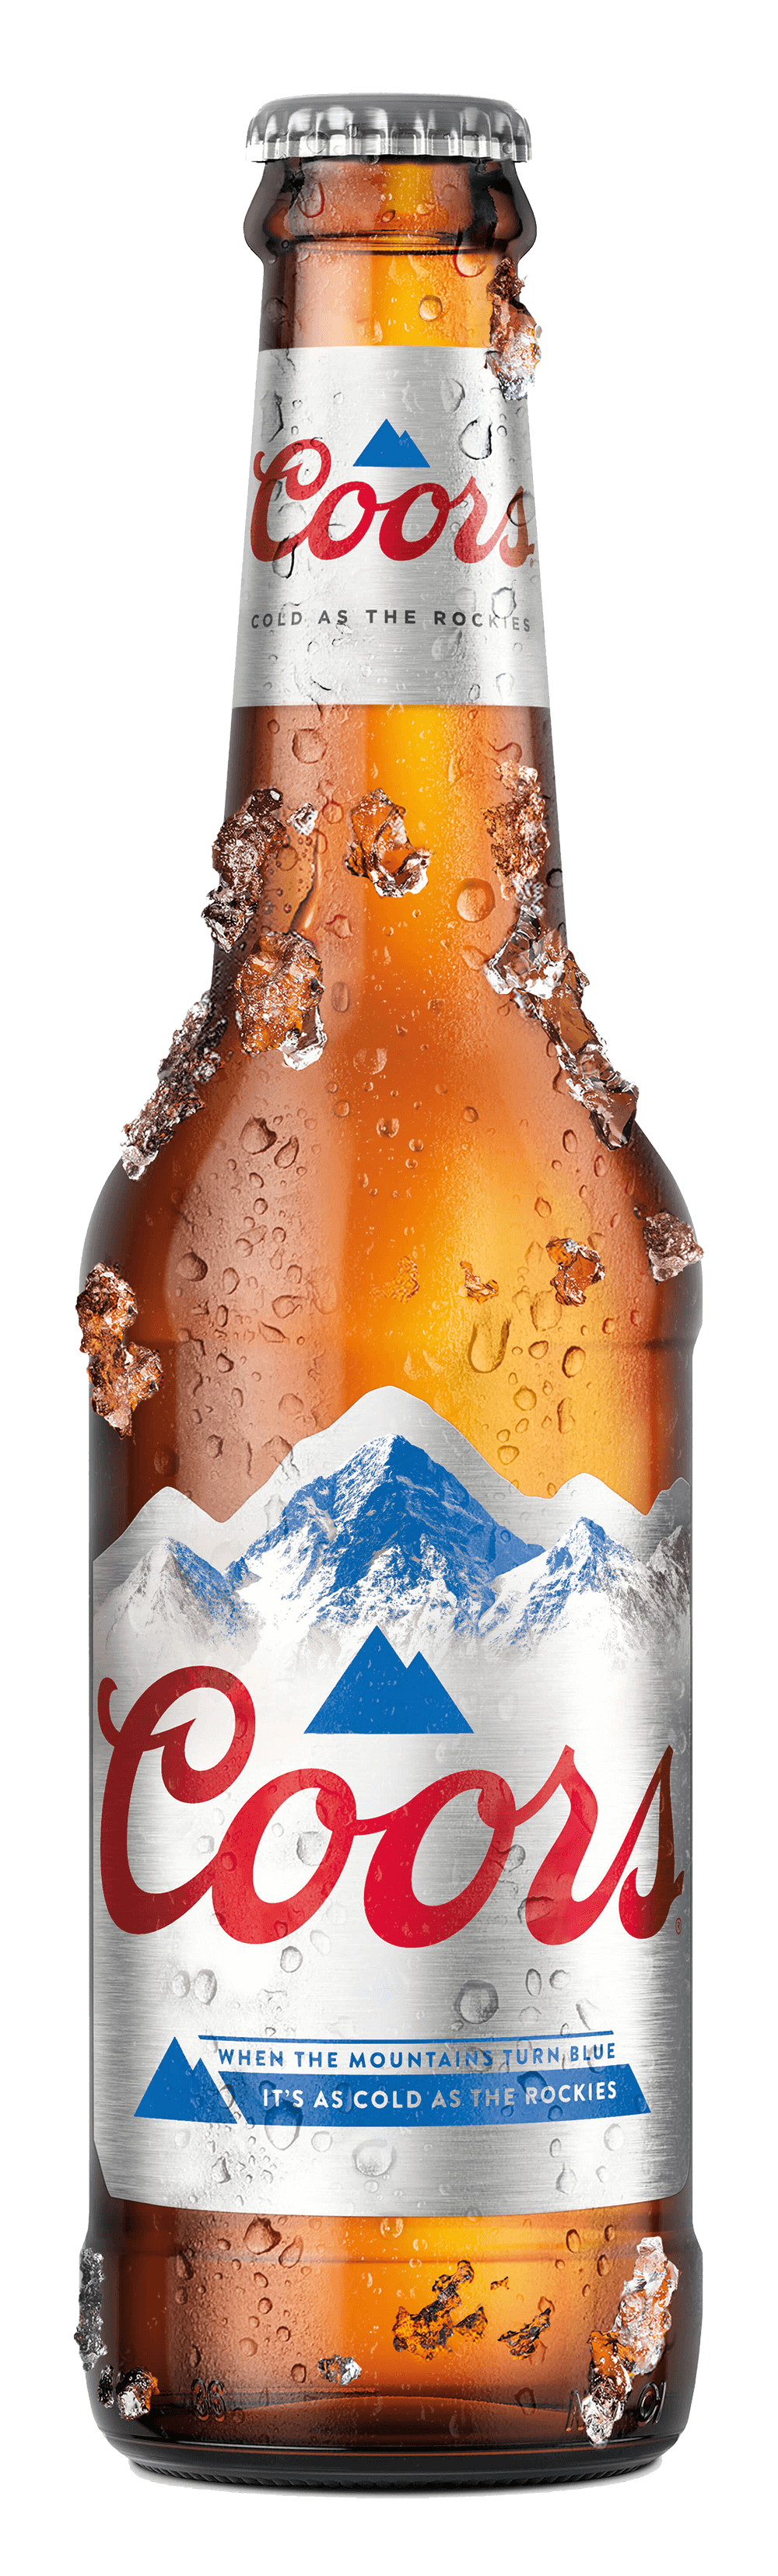 Coors 330 bottle iced